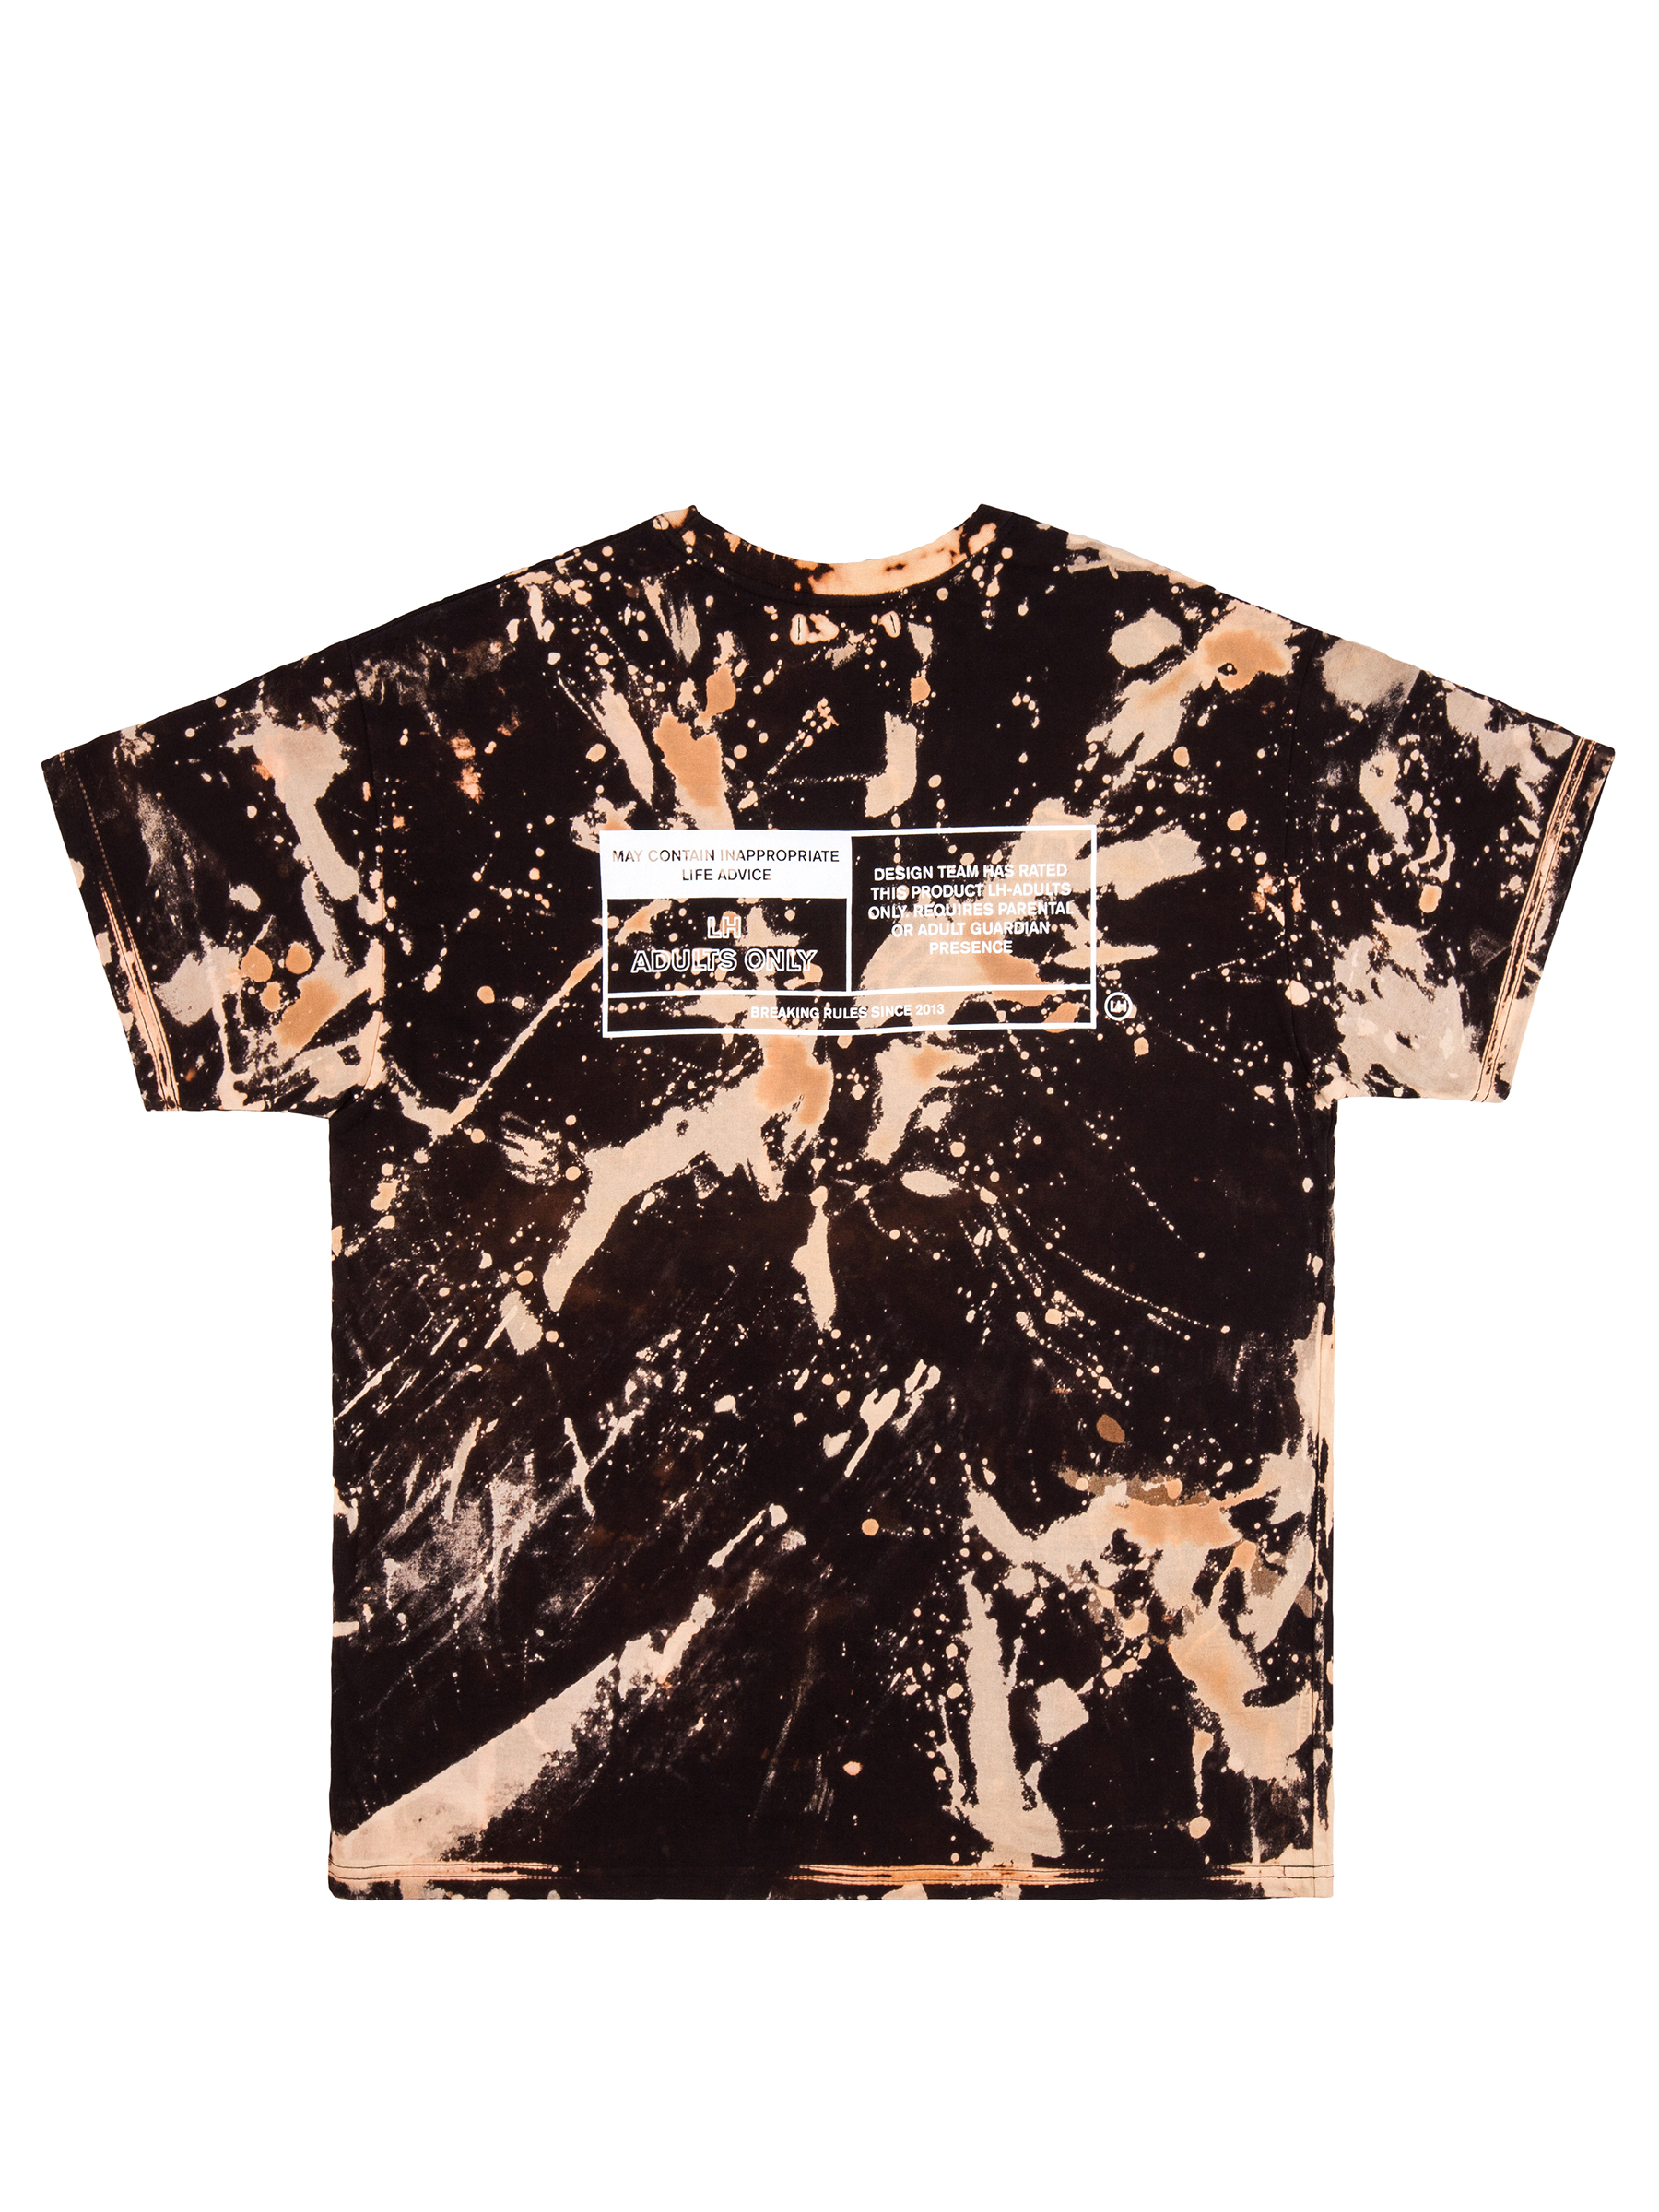 LH RATED ADULTS TIE DYE TEE